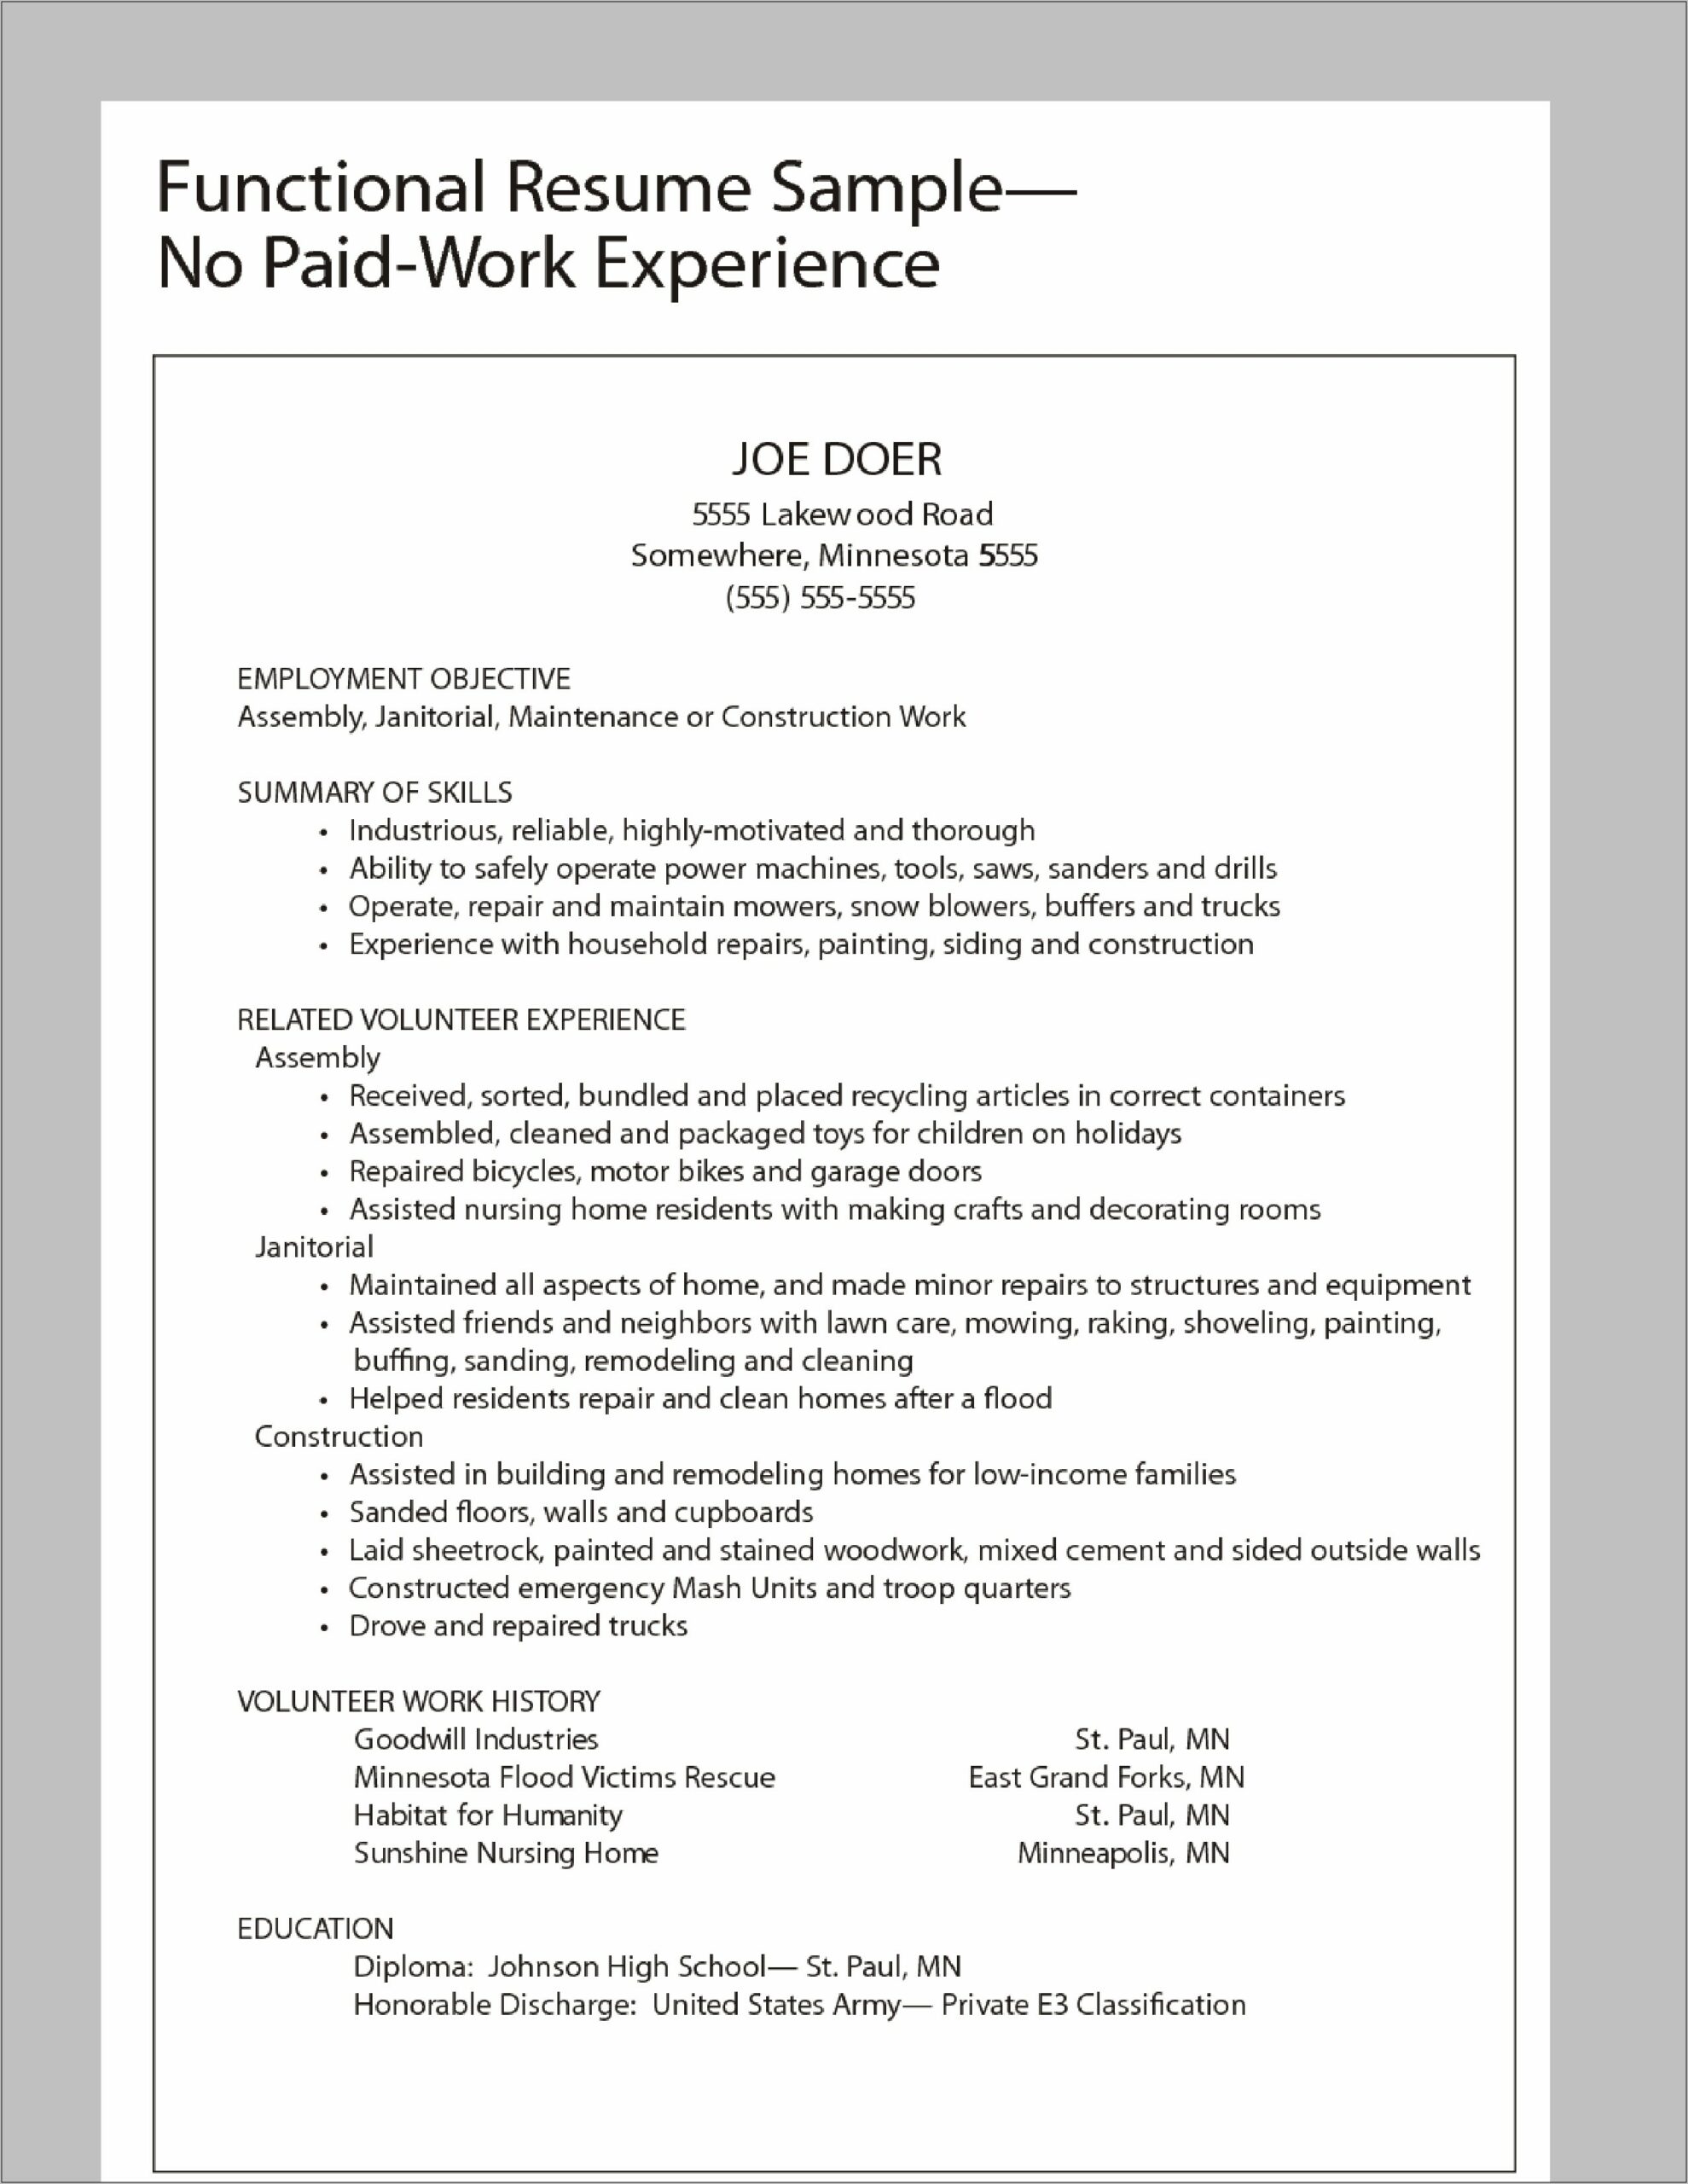 Resume Format For No Job Experience